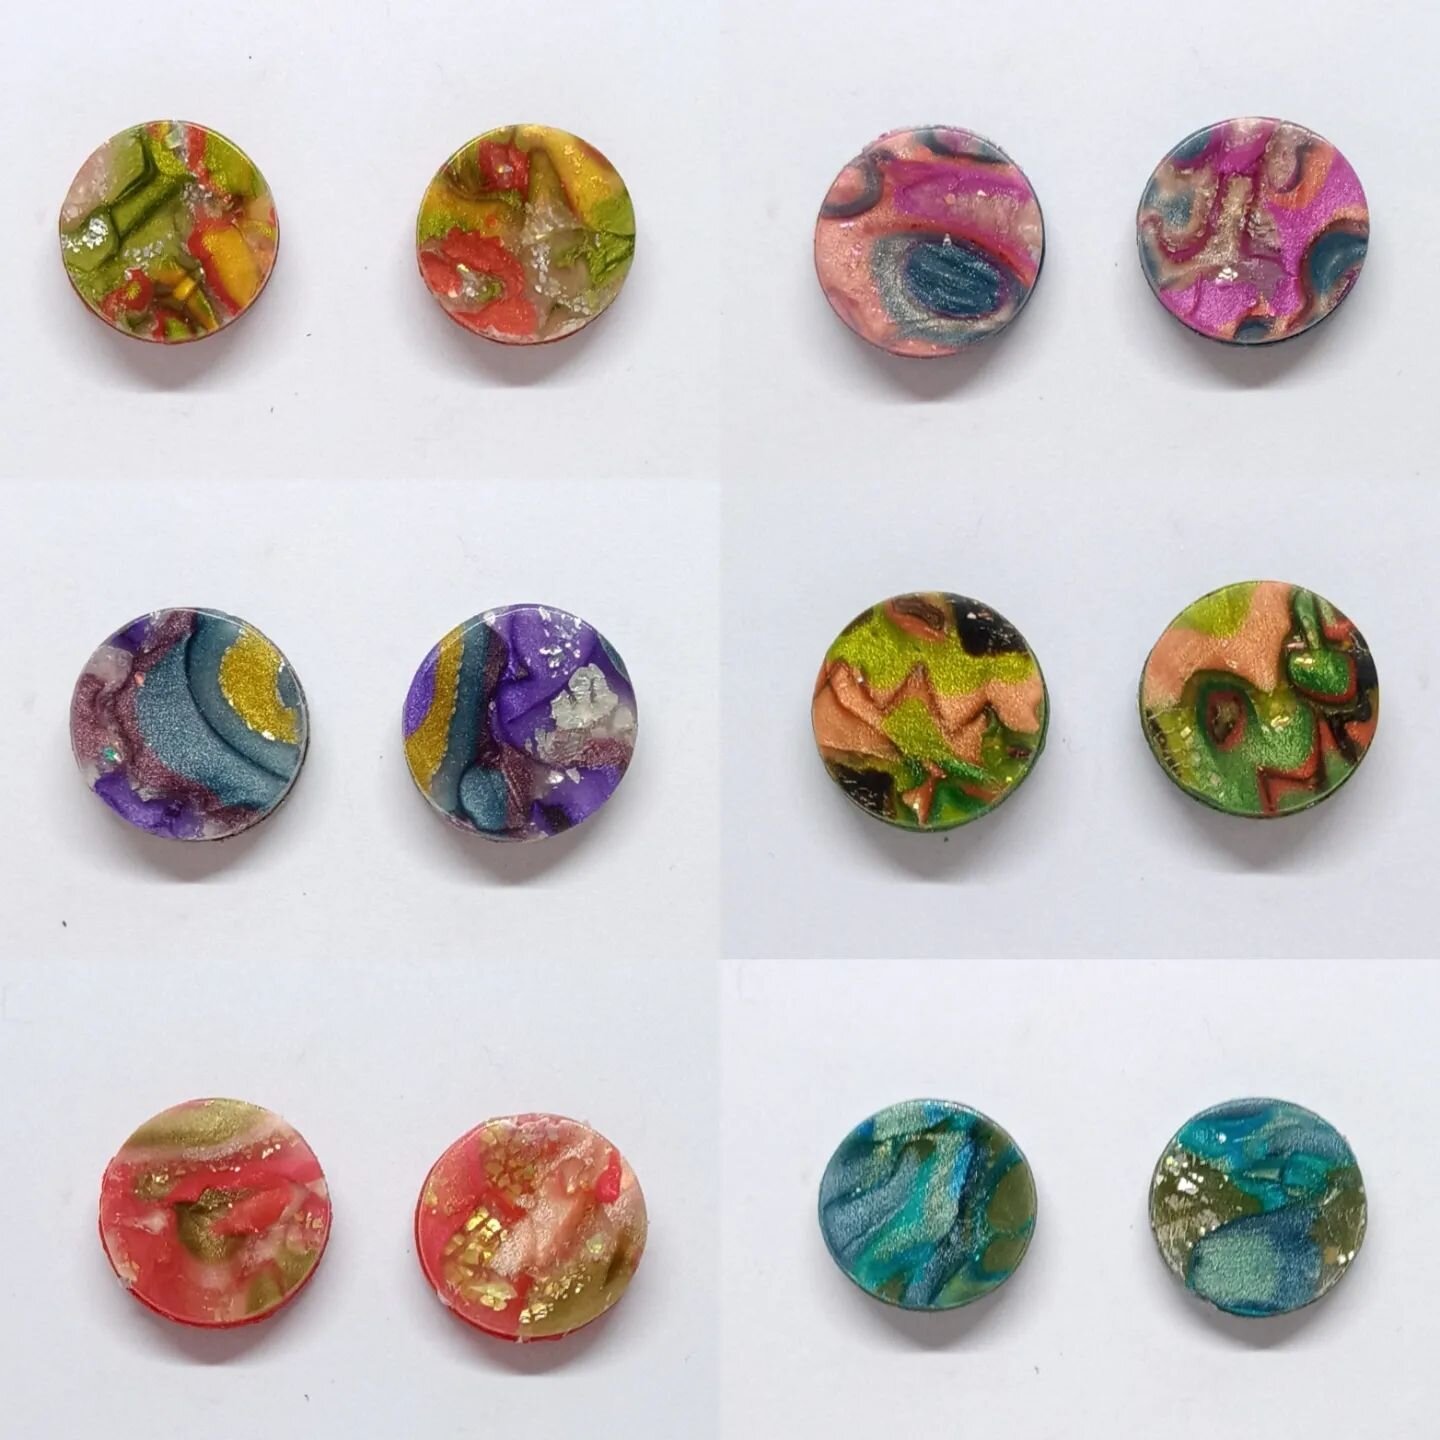 New stud earrings are listed this evening on my website.

These are part of the new collection of mokume gane designs I have been working on for the past week. I still have lots more work to do completing the pendants and sanding and polishing the dr